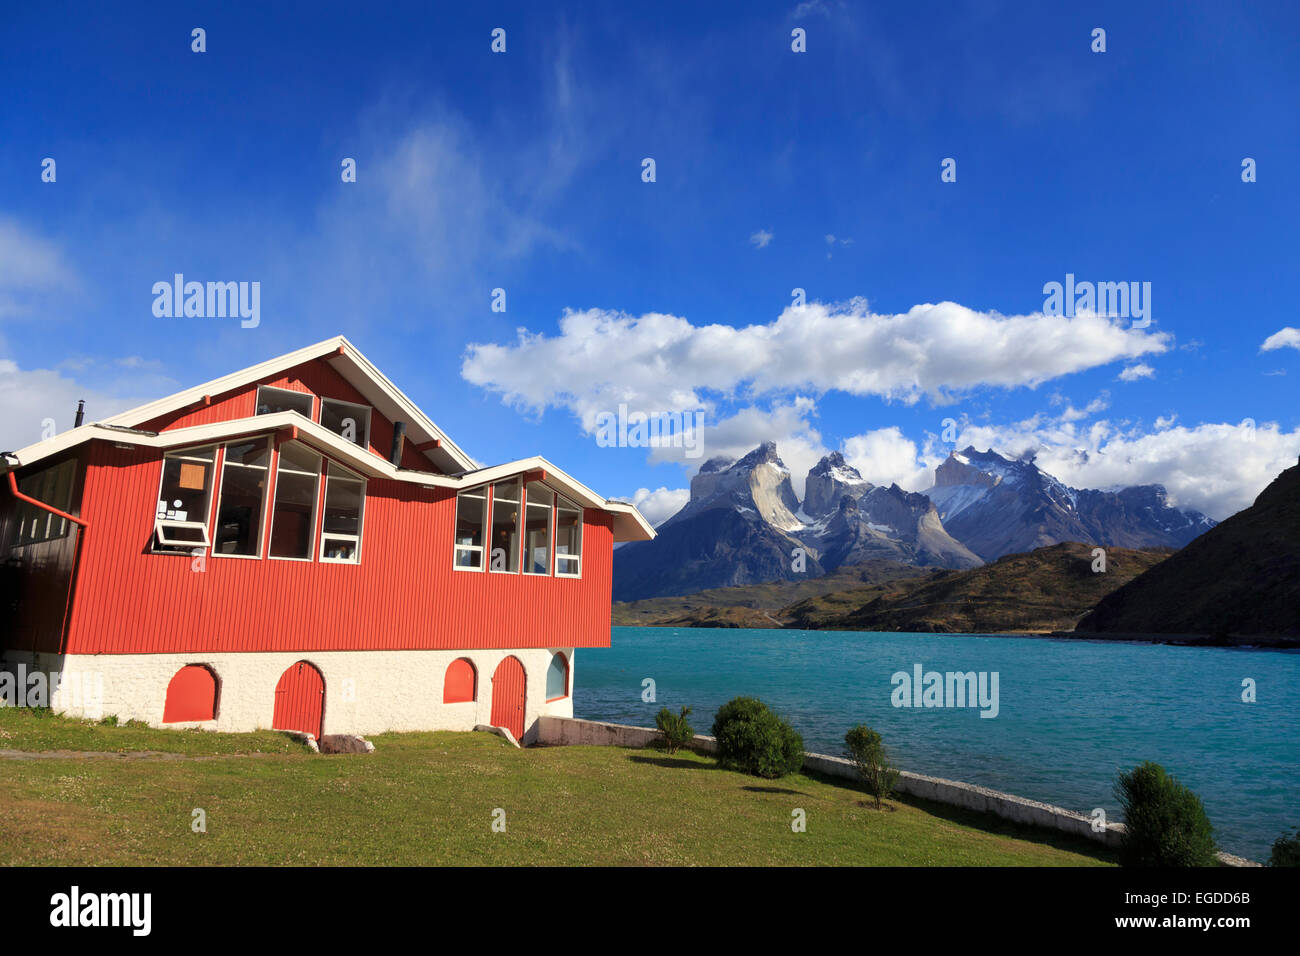 Chile, Patagonia, Torres del Paine National Park (UNESCO Site), Cuernos del Paine peaks and Hosteria Pehoe Historic Hotel Stock Photo